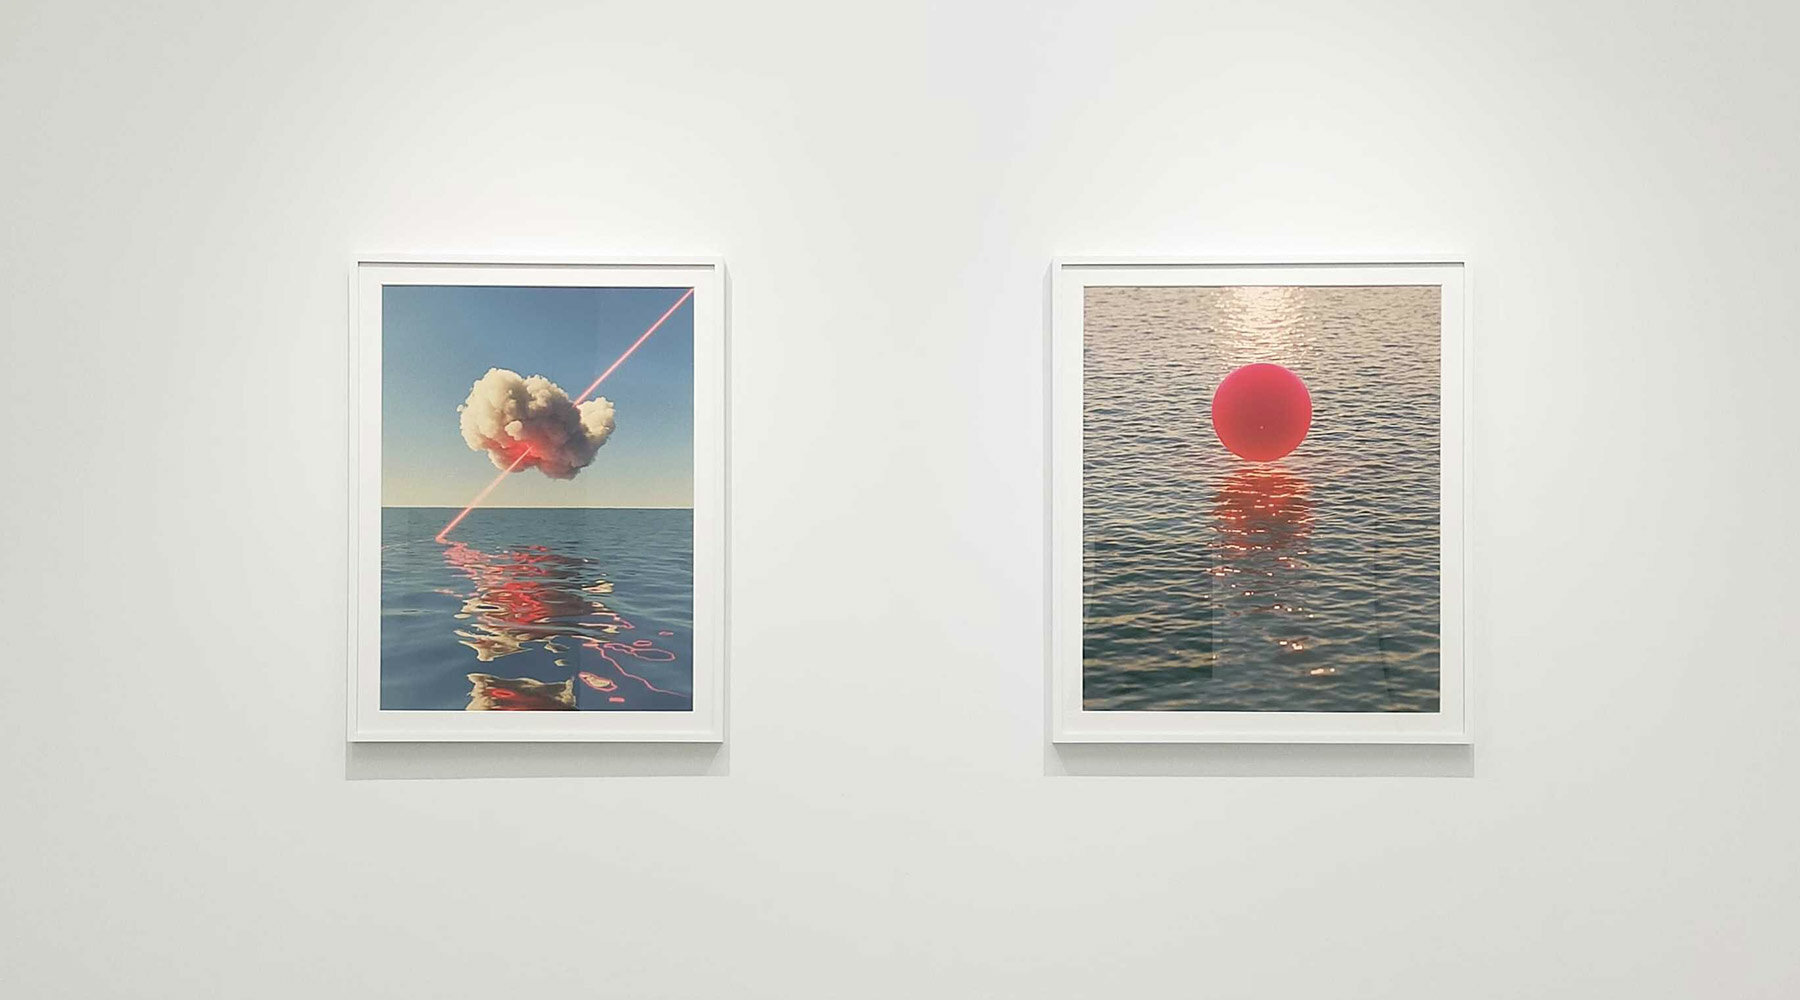 david stenbeck's photo series at SNOW contemporary in tokyo takes us to ...